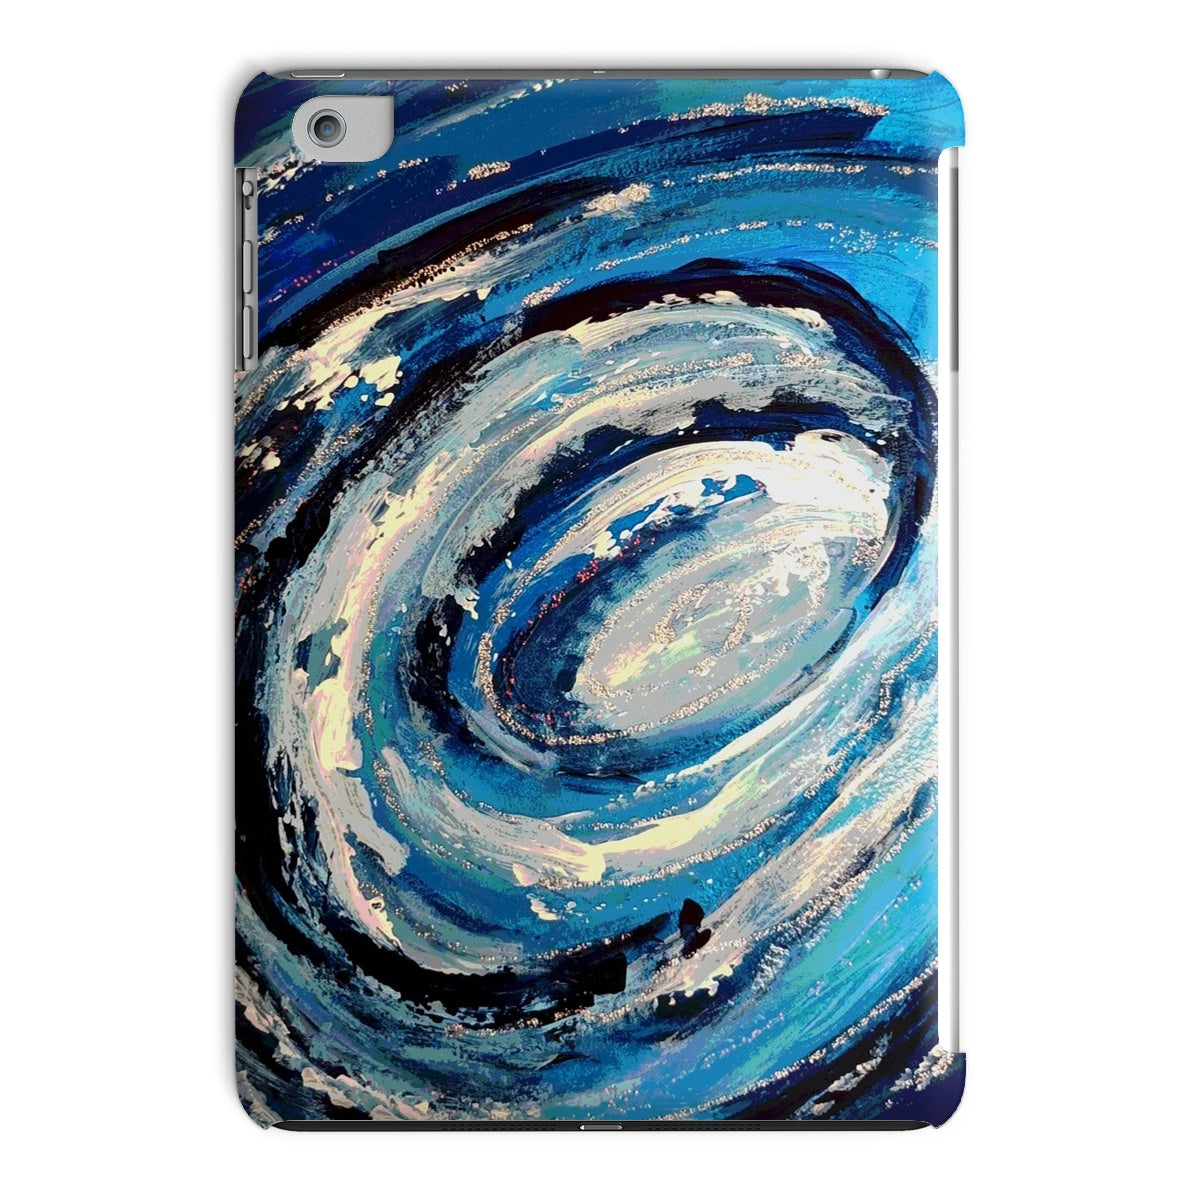 Spinning Tablet Cases